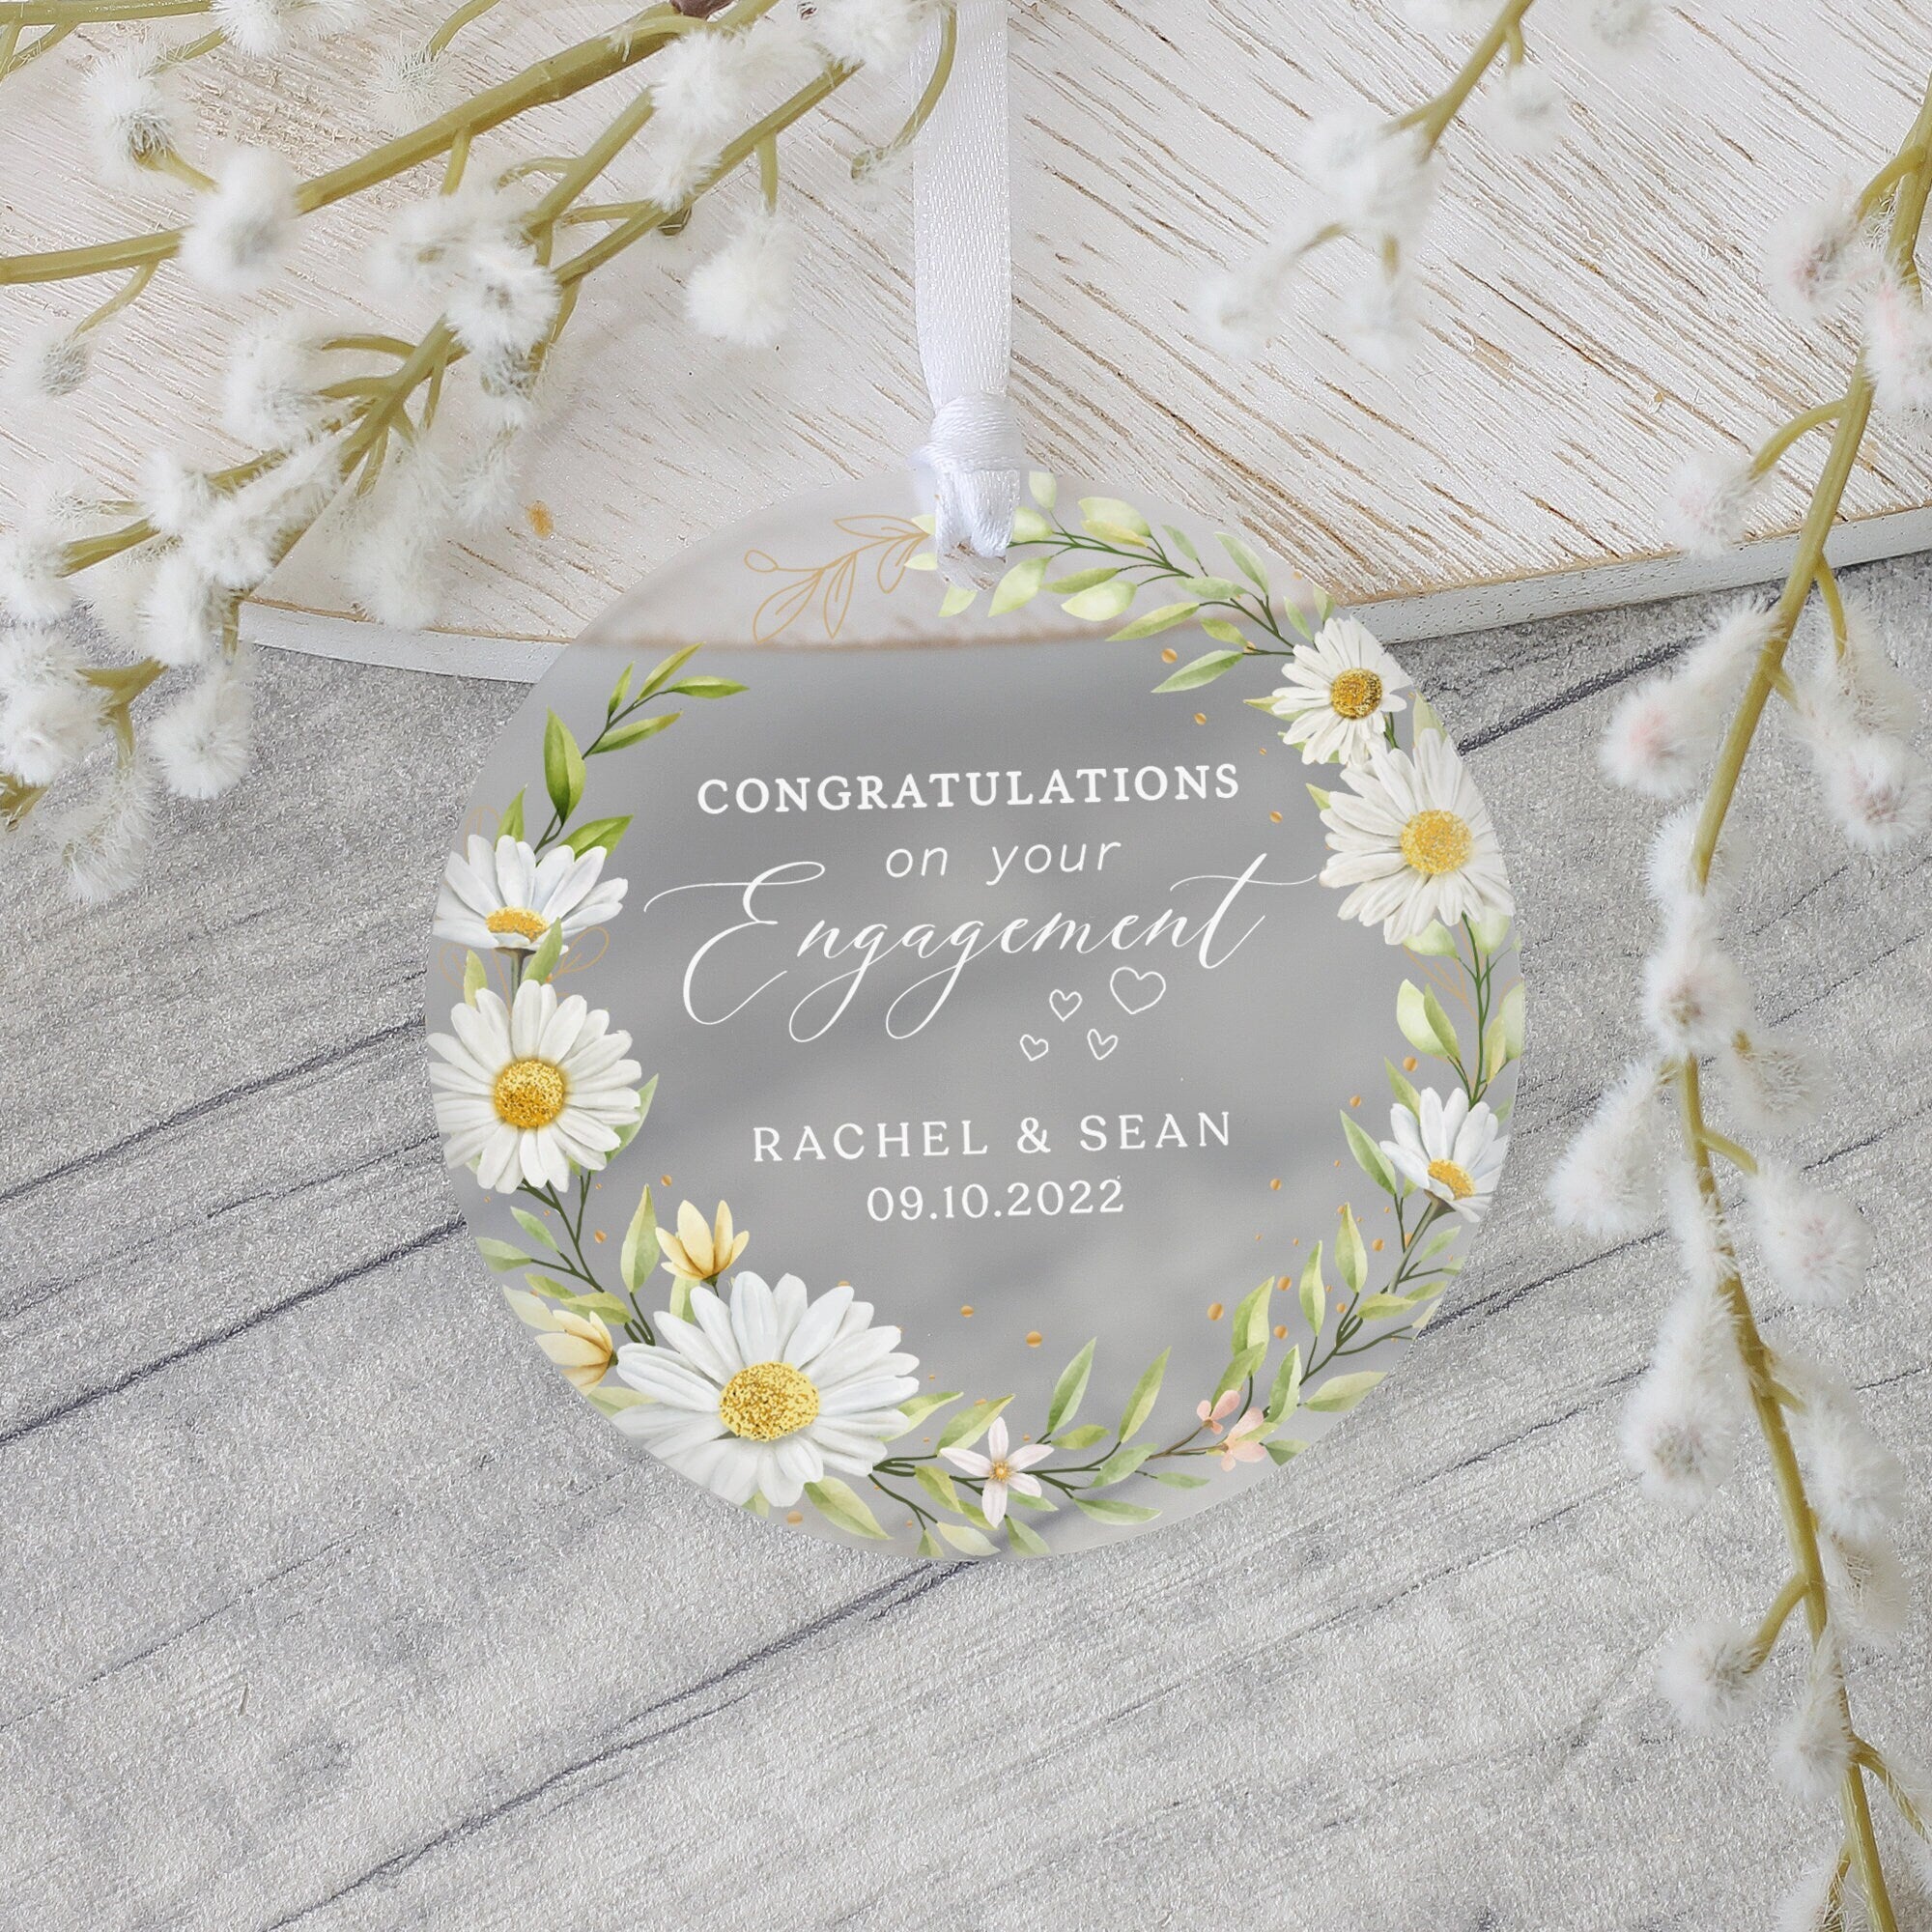 Engagement Gift, Personalised Engaged Gift, Engagement Keepsake Gift, Frosted Acrylic, Special Date Keepsake Gifts, Gift for Couples